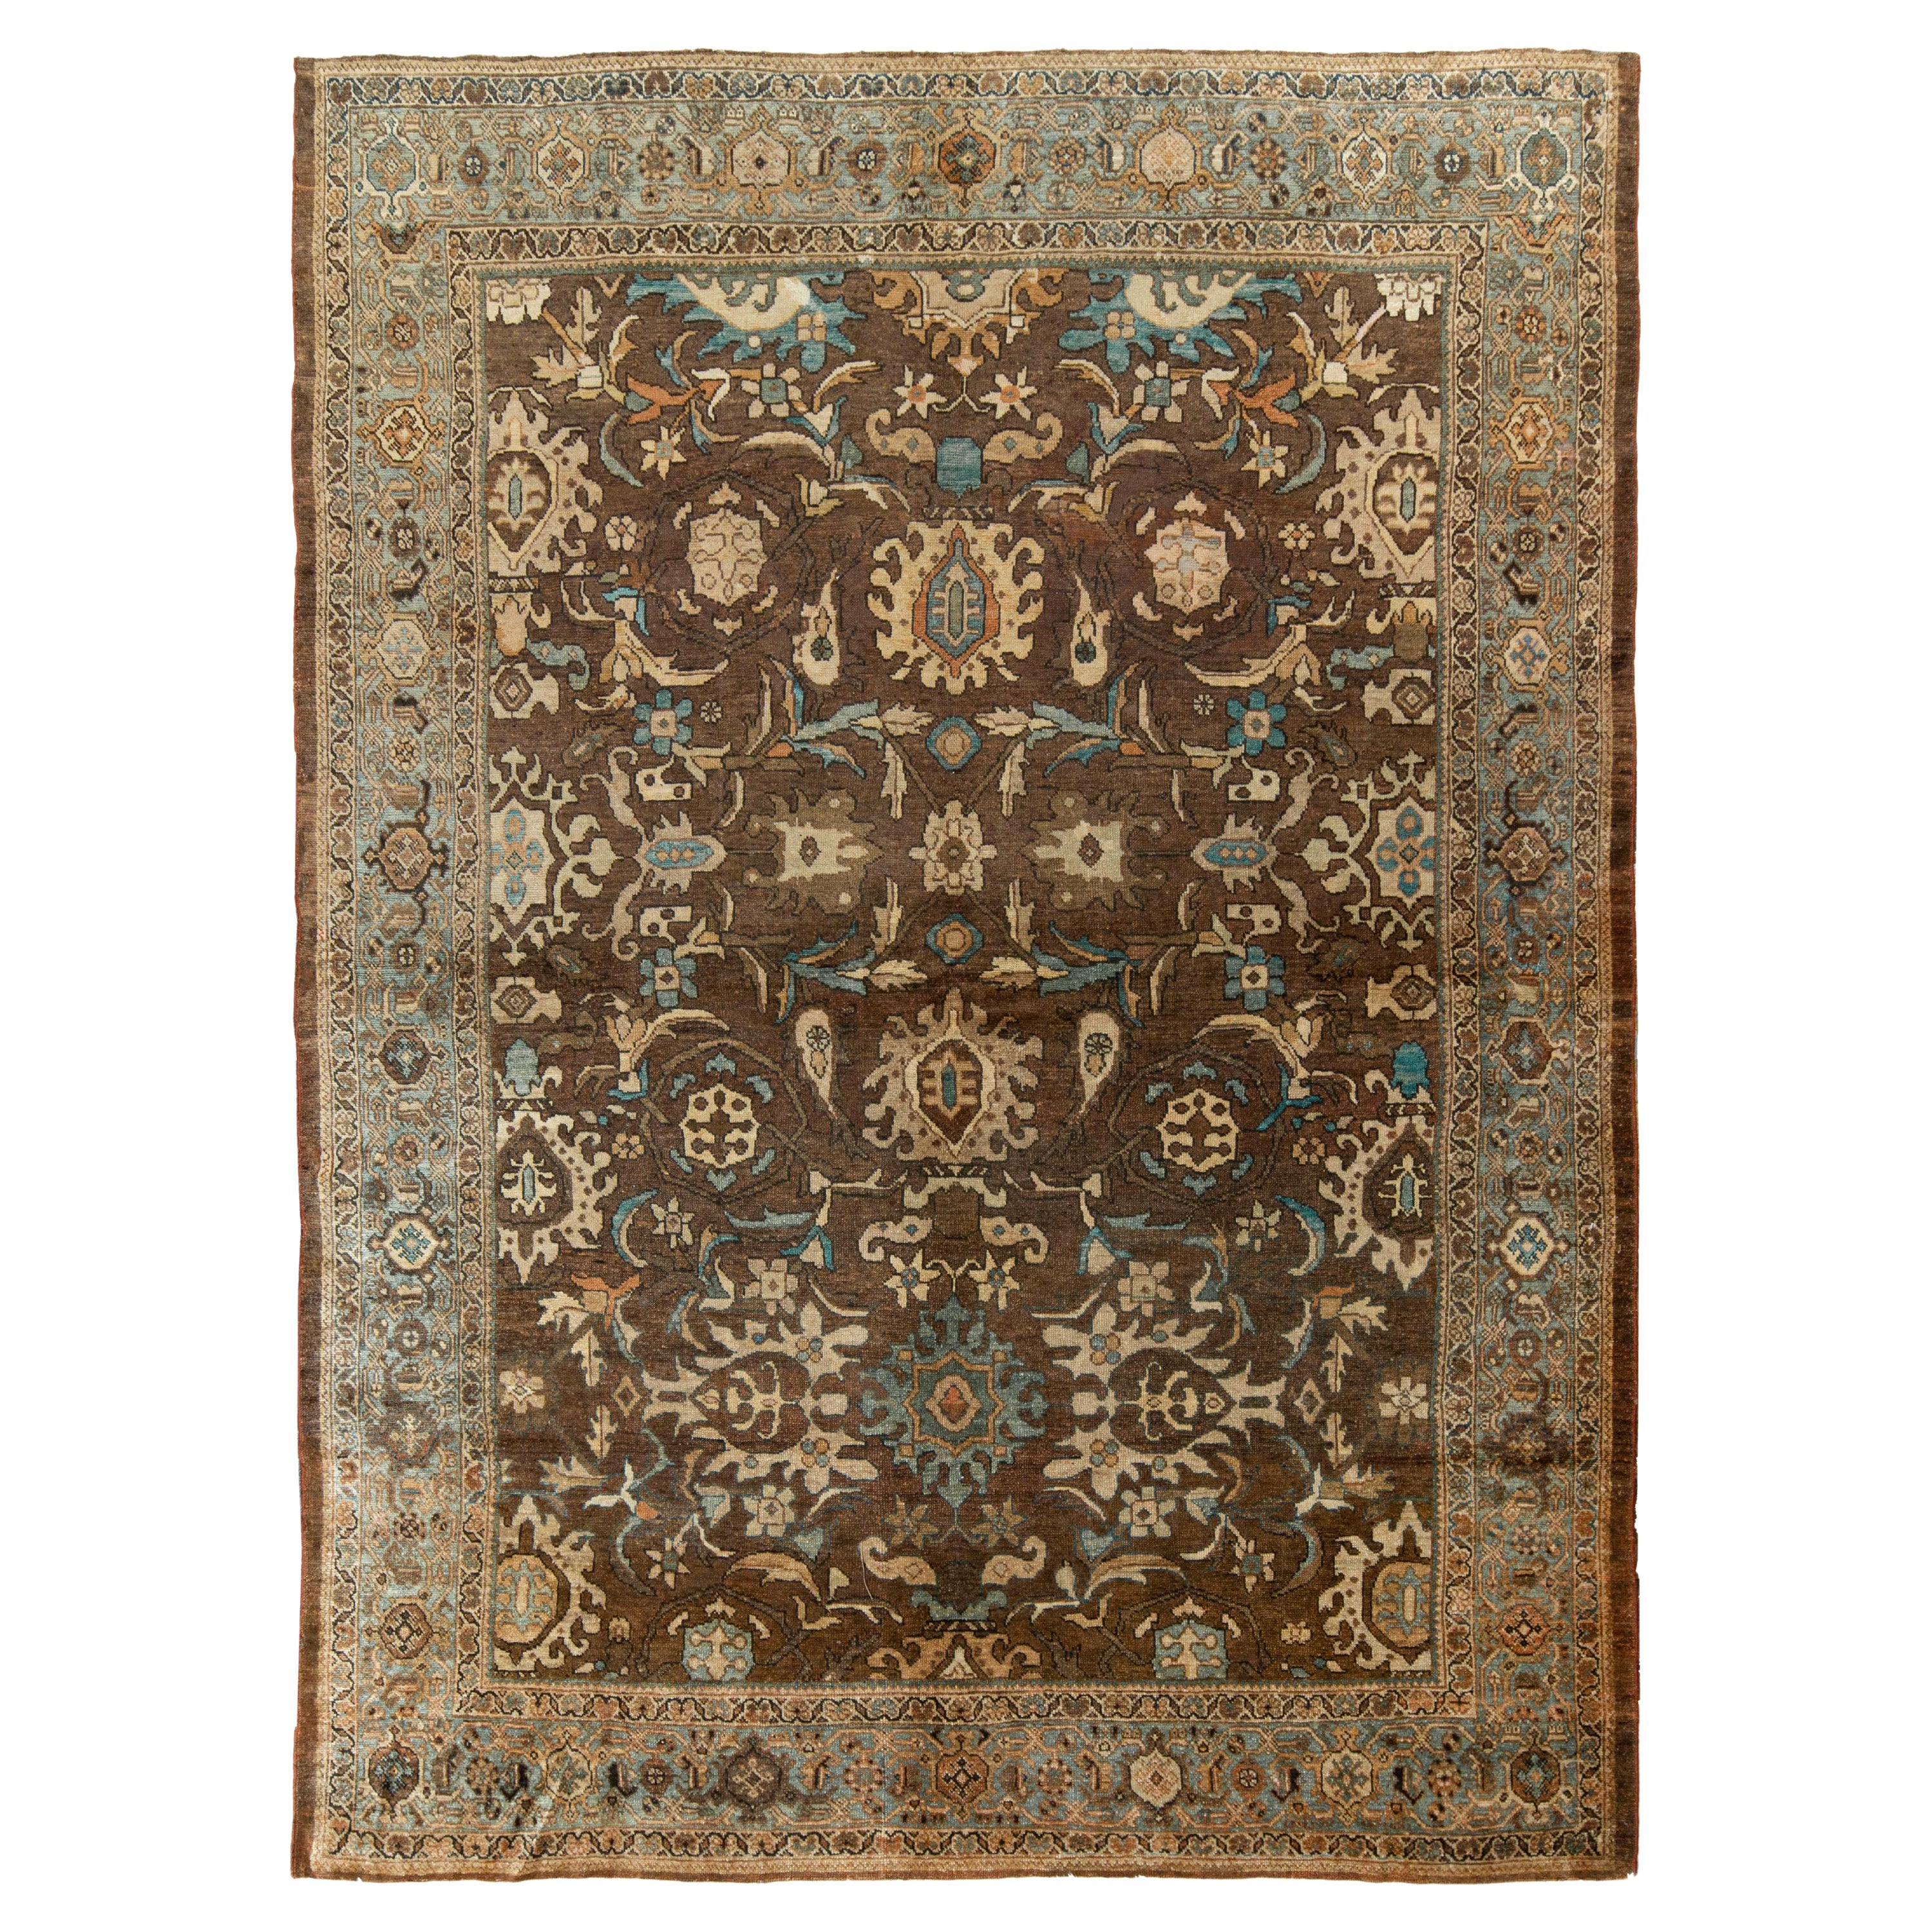 Hand-Knotted Antique Persian Rug, Beige-Brown Blue Floral Pattern by Rug & Kilim